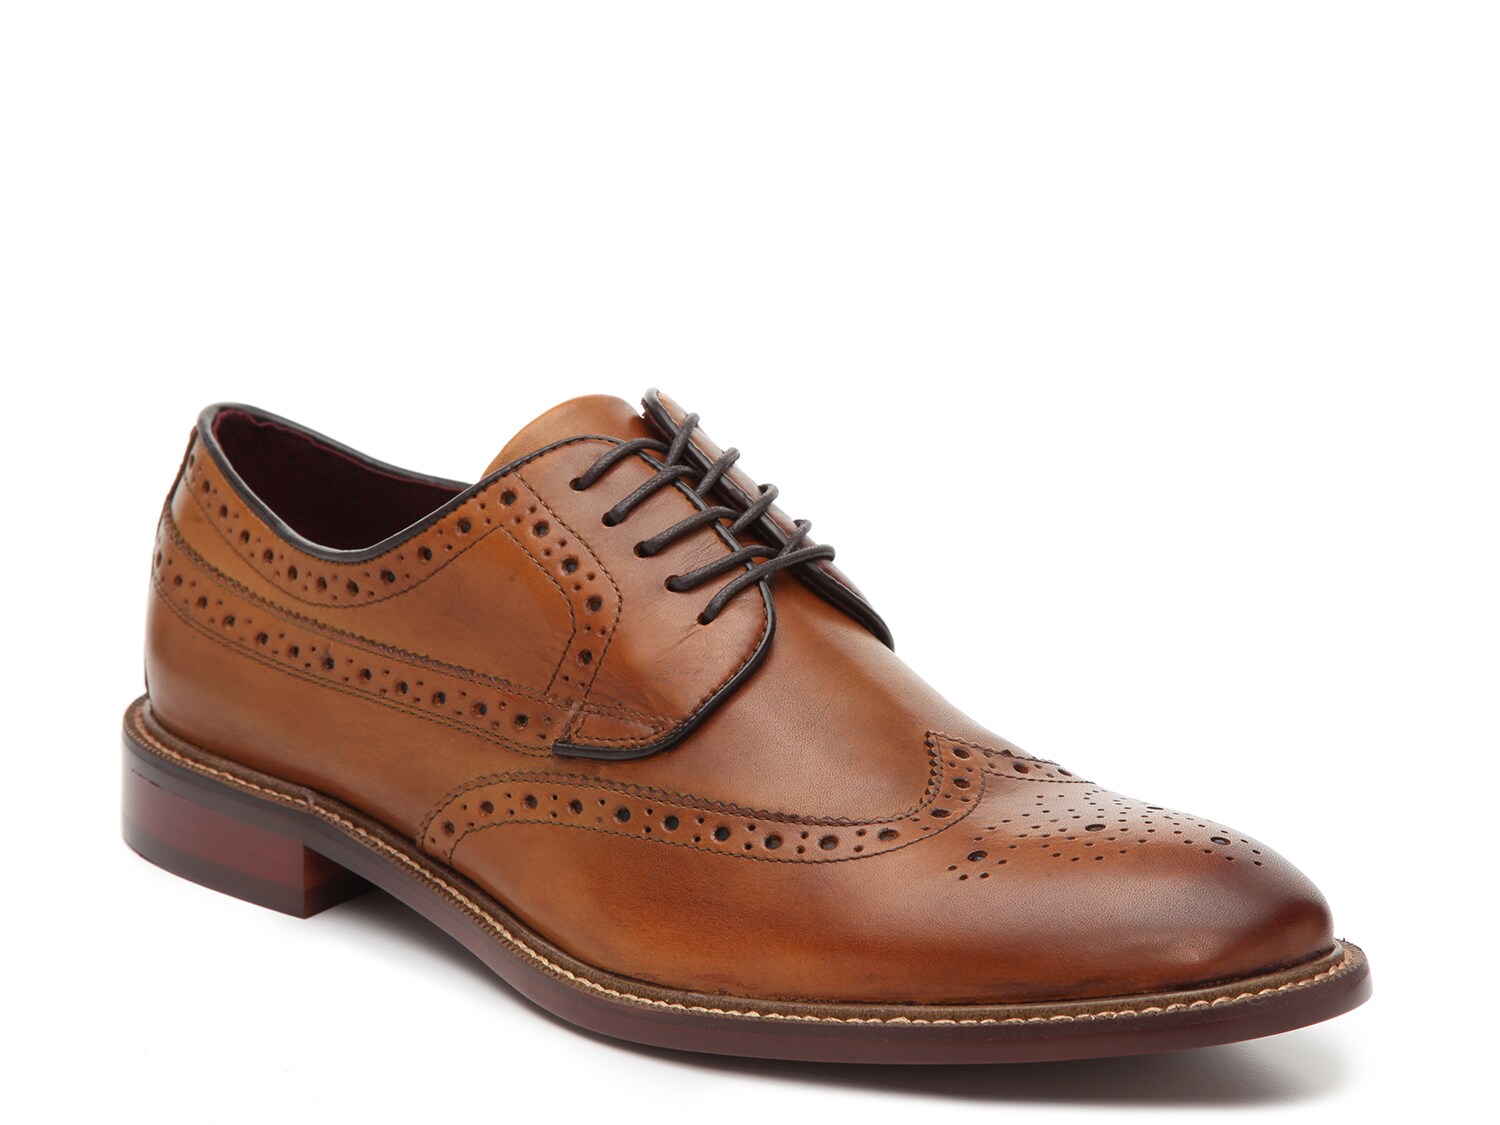 men's dress shoes with athletic sole